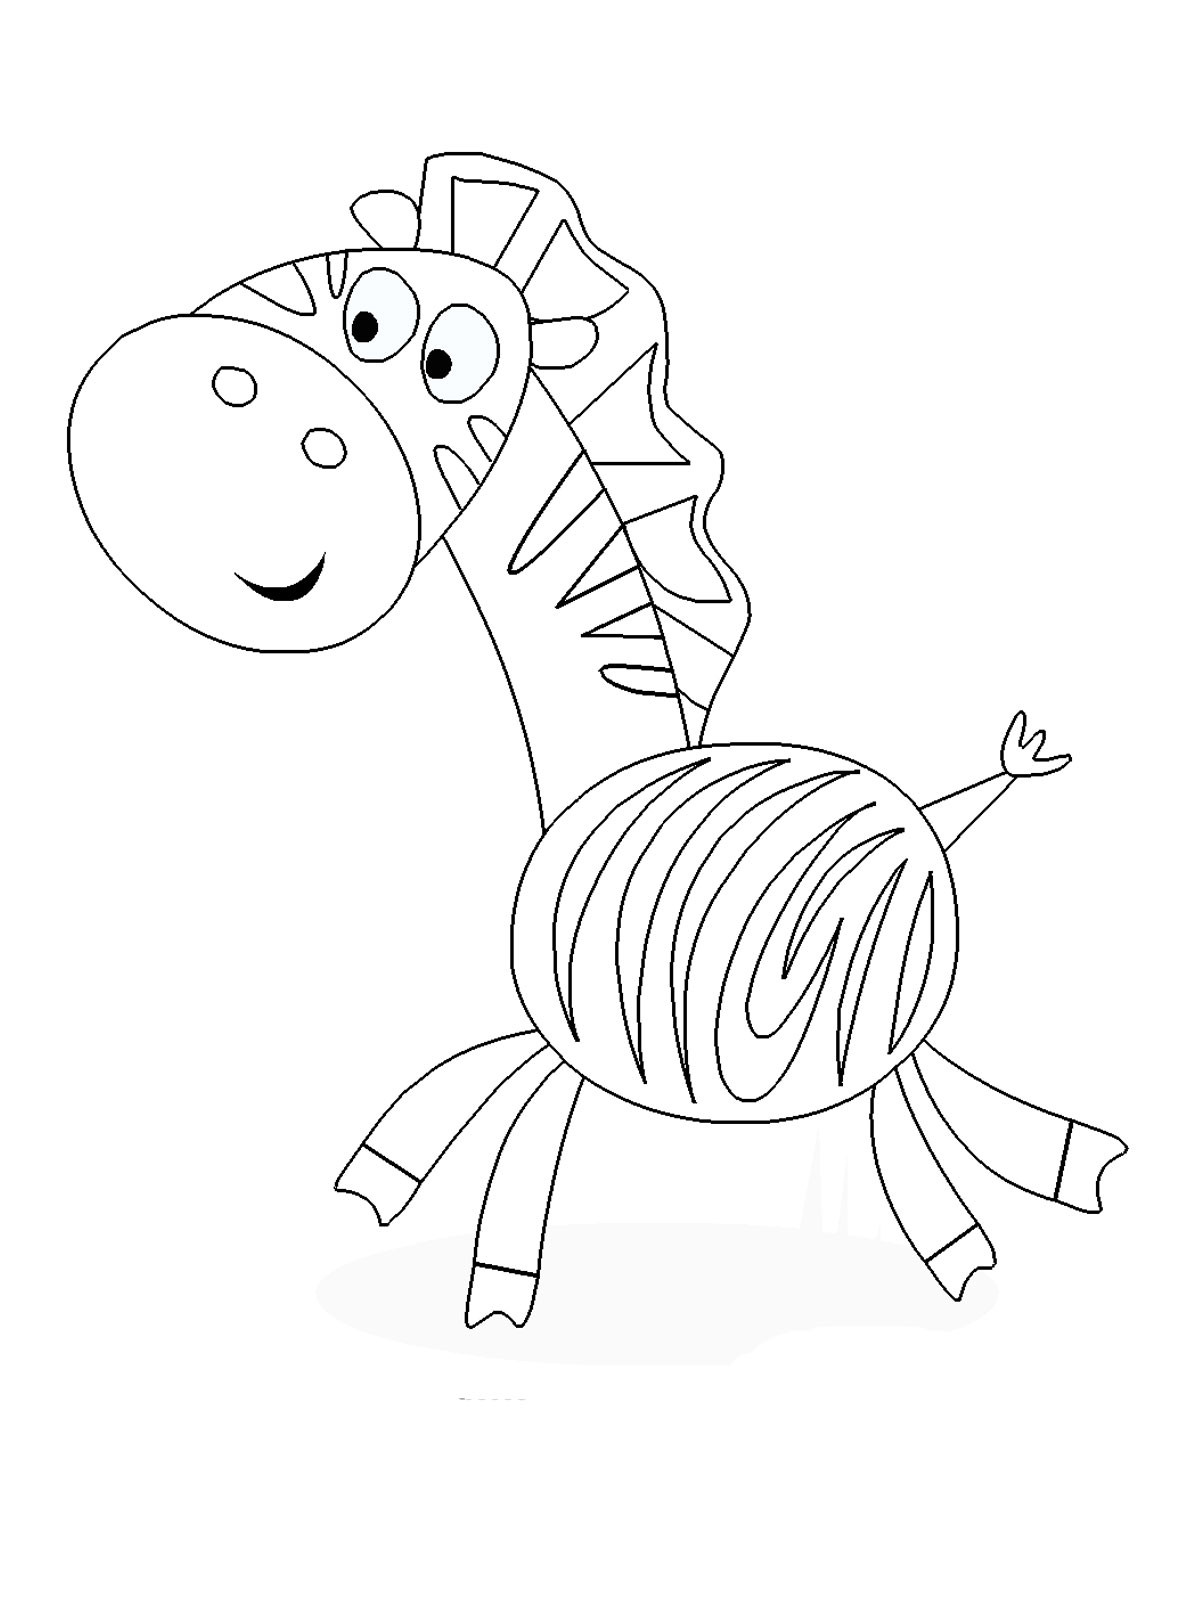 Coloring Pages For Toddlers To Print
 Printable coloring pages for kids